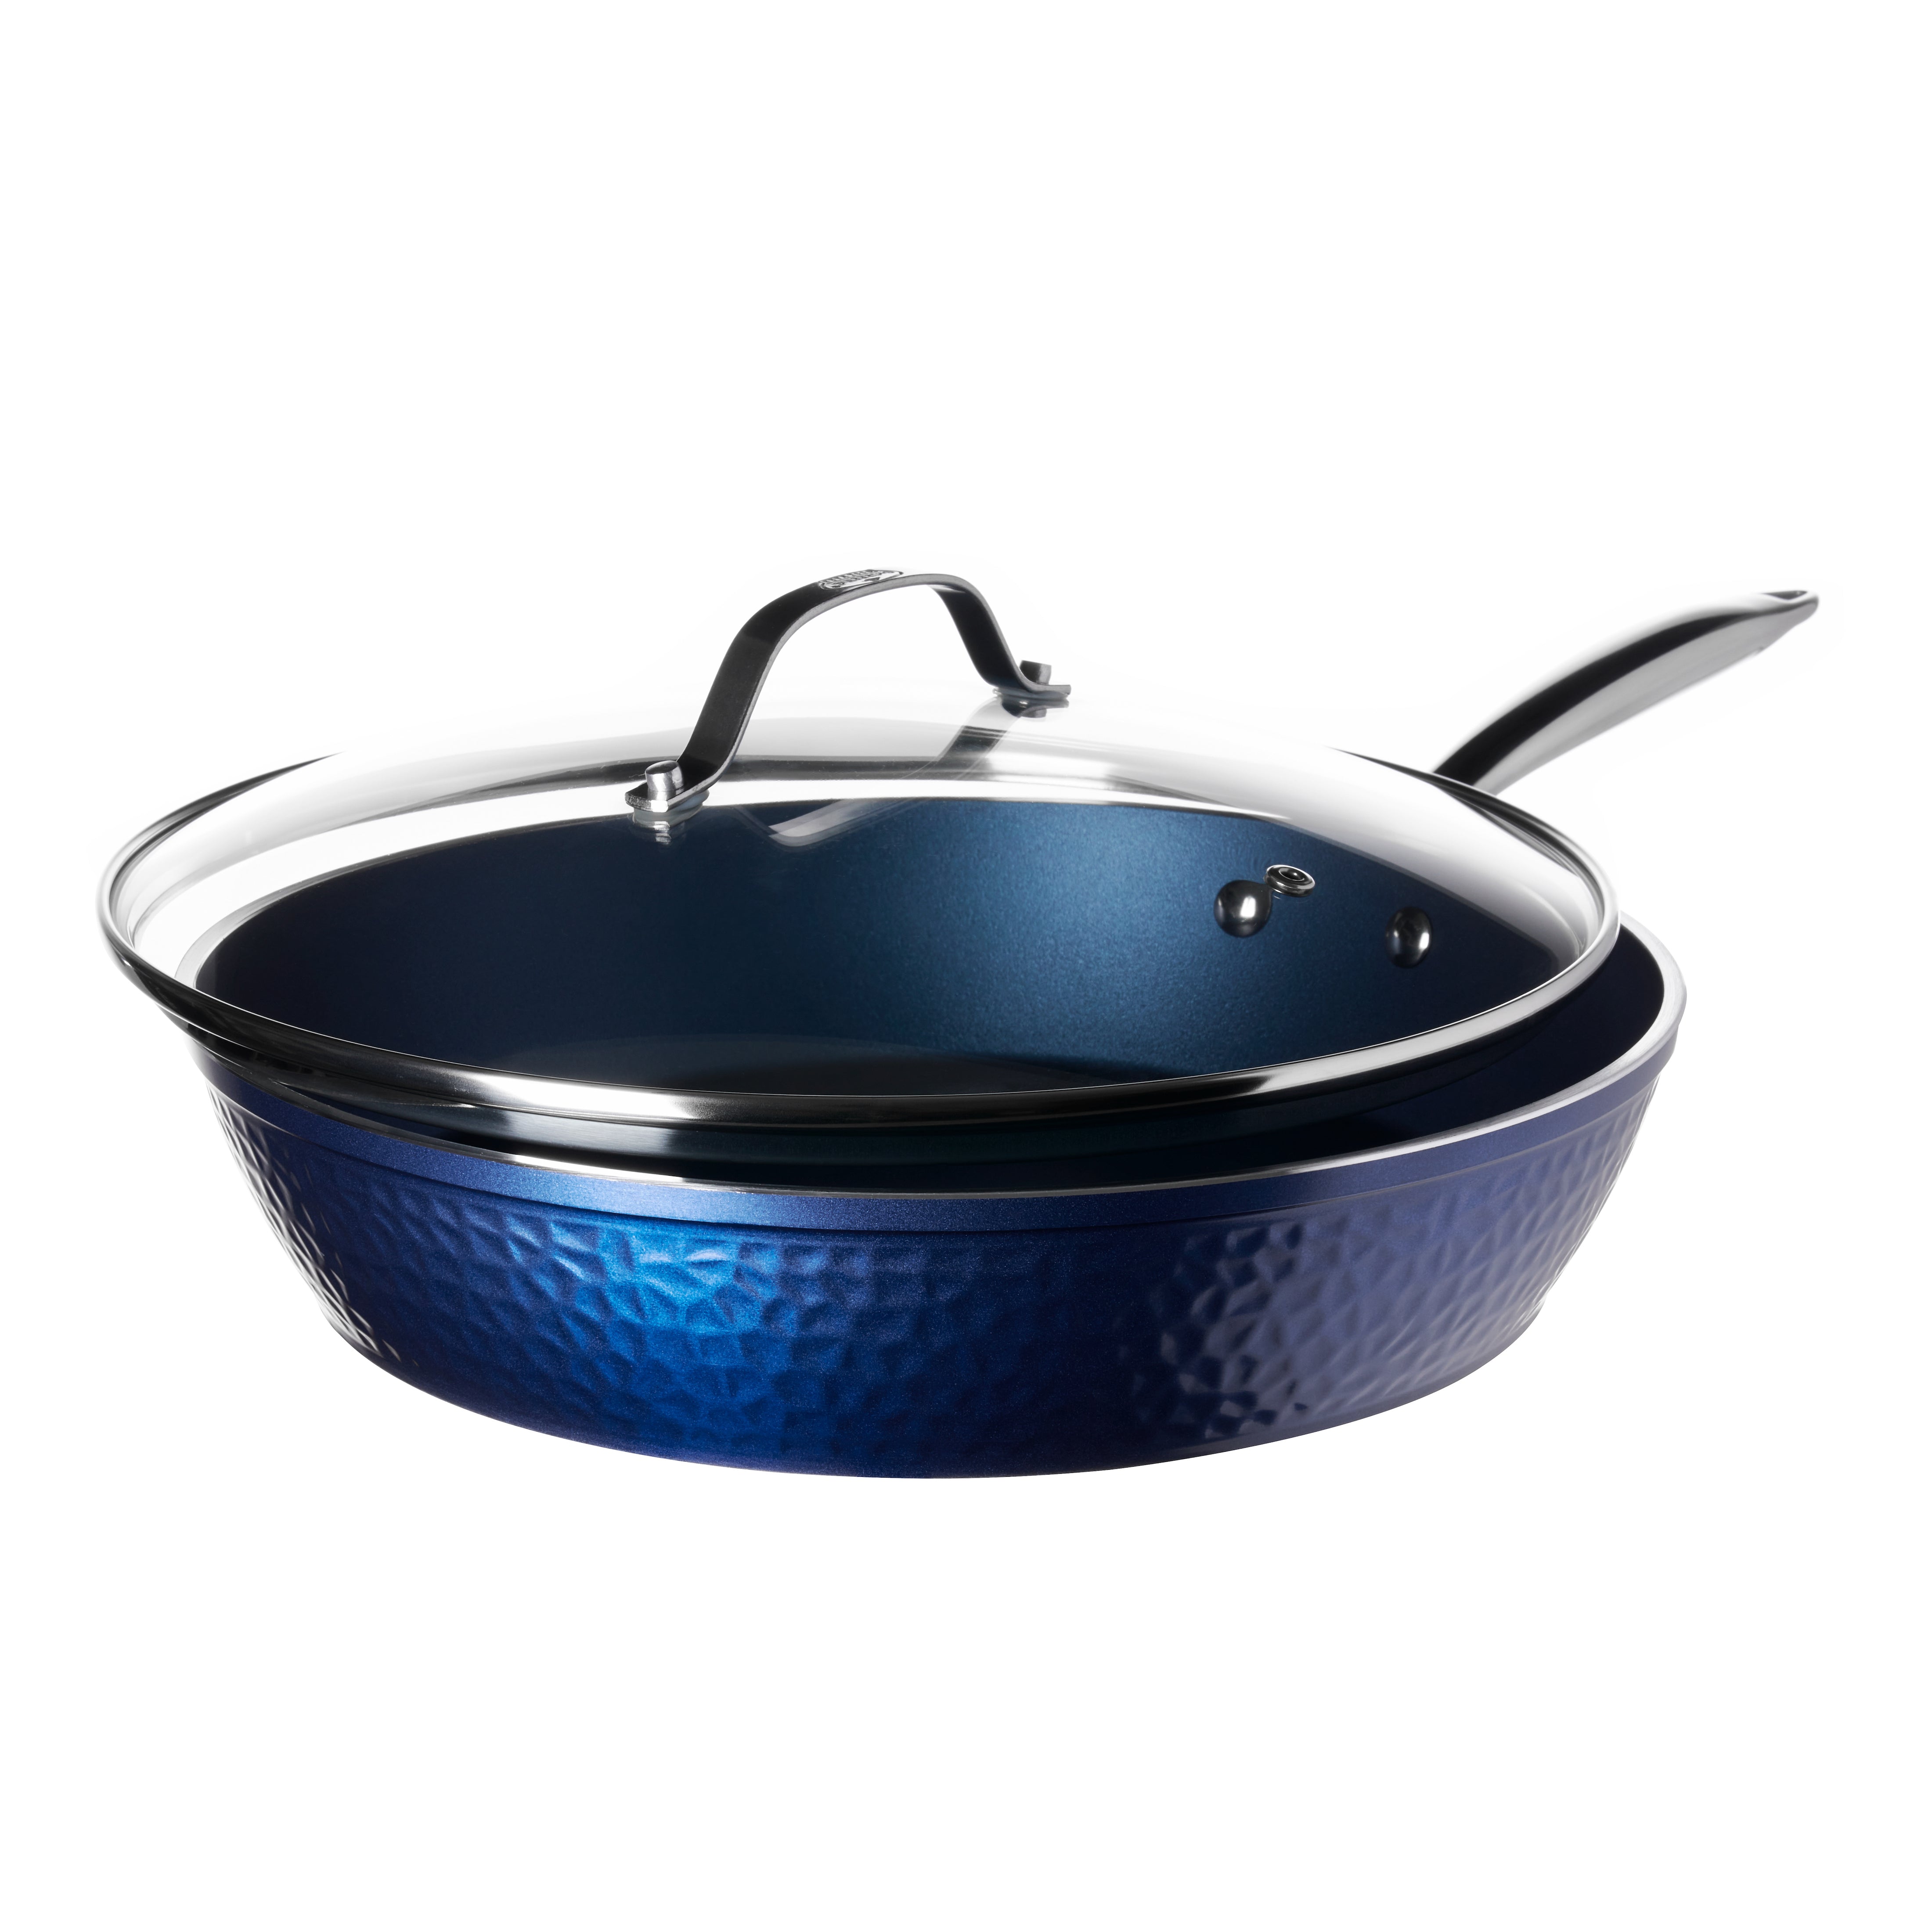 by 13 Inch Nonstick Cast Iron Dual Handle Pan, Ceramic Coated Frying Pan,  Blue Baking tray